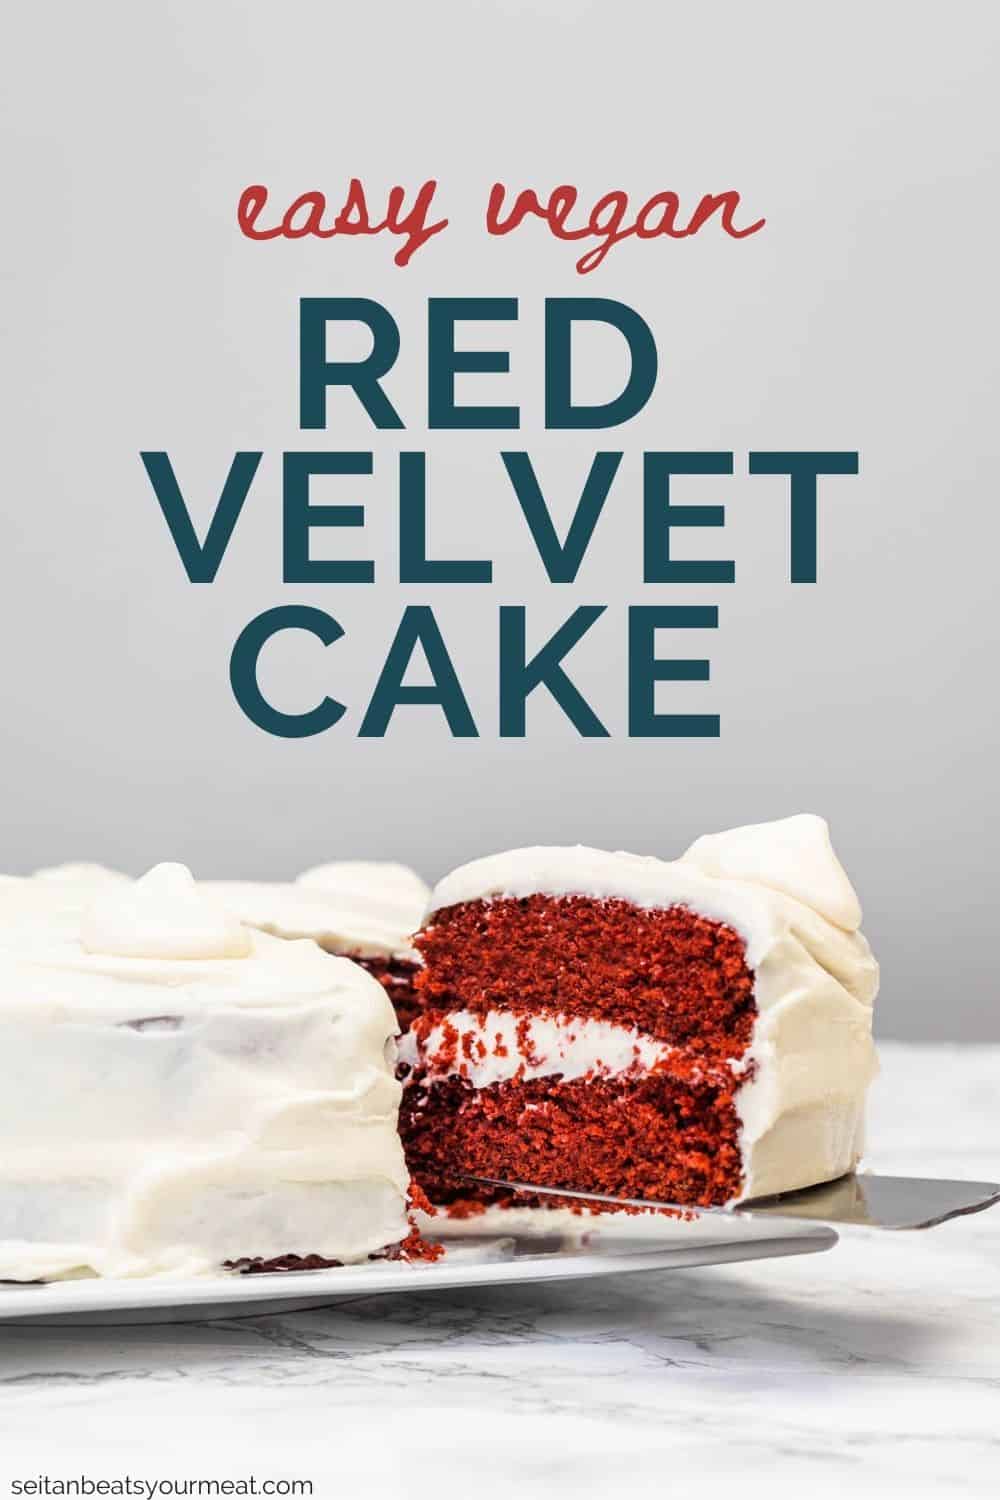 Slice of red velvet cake being lifted out of cake on plate with a cake server with text "Easy Vegan Red Velvet Cake"